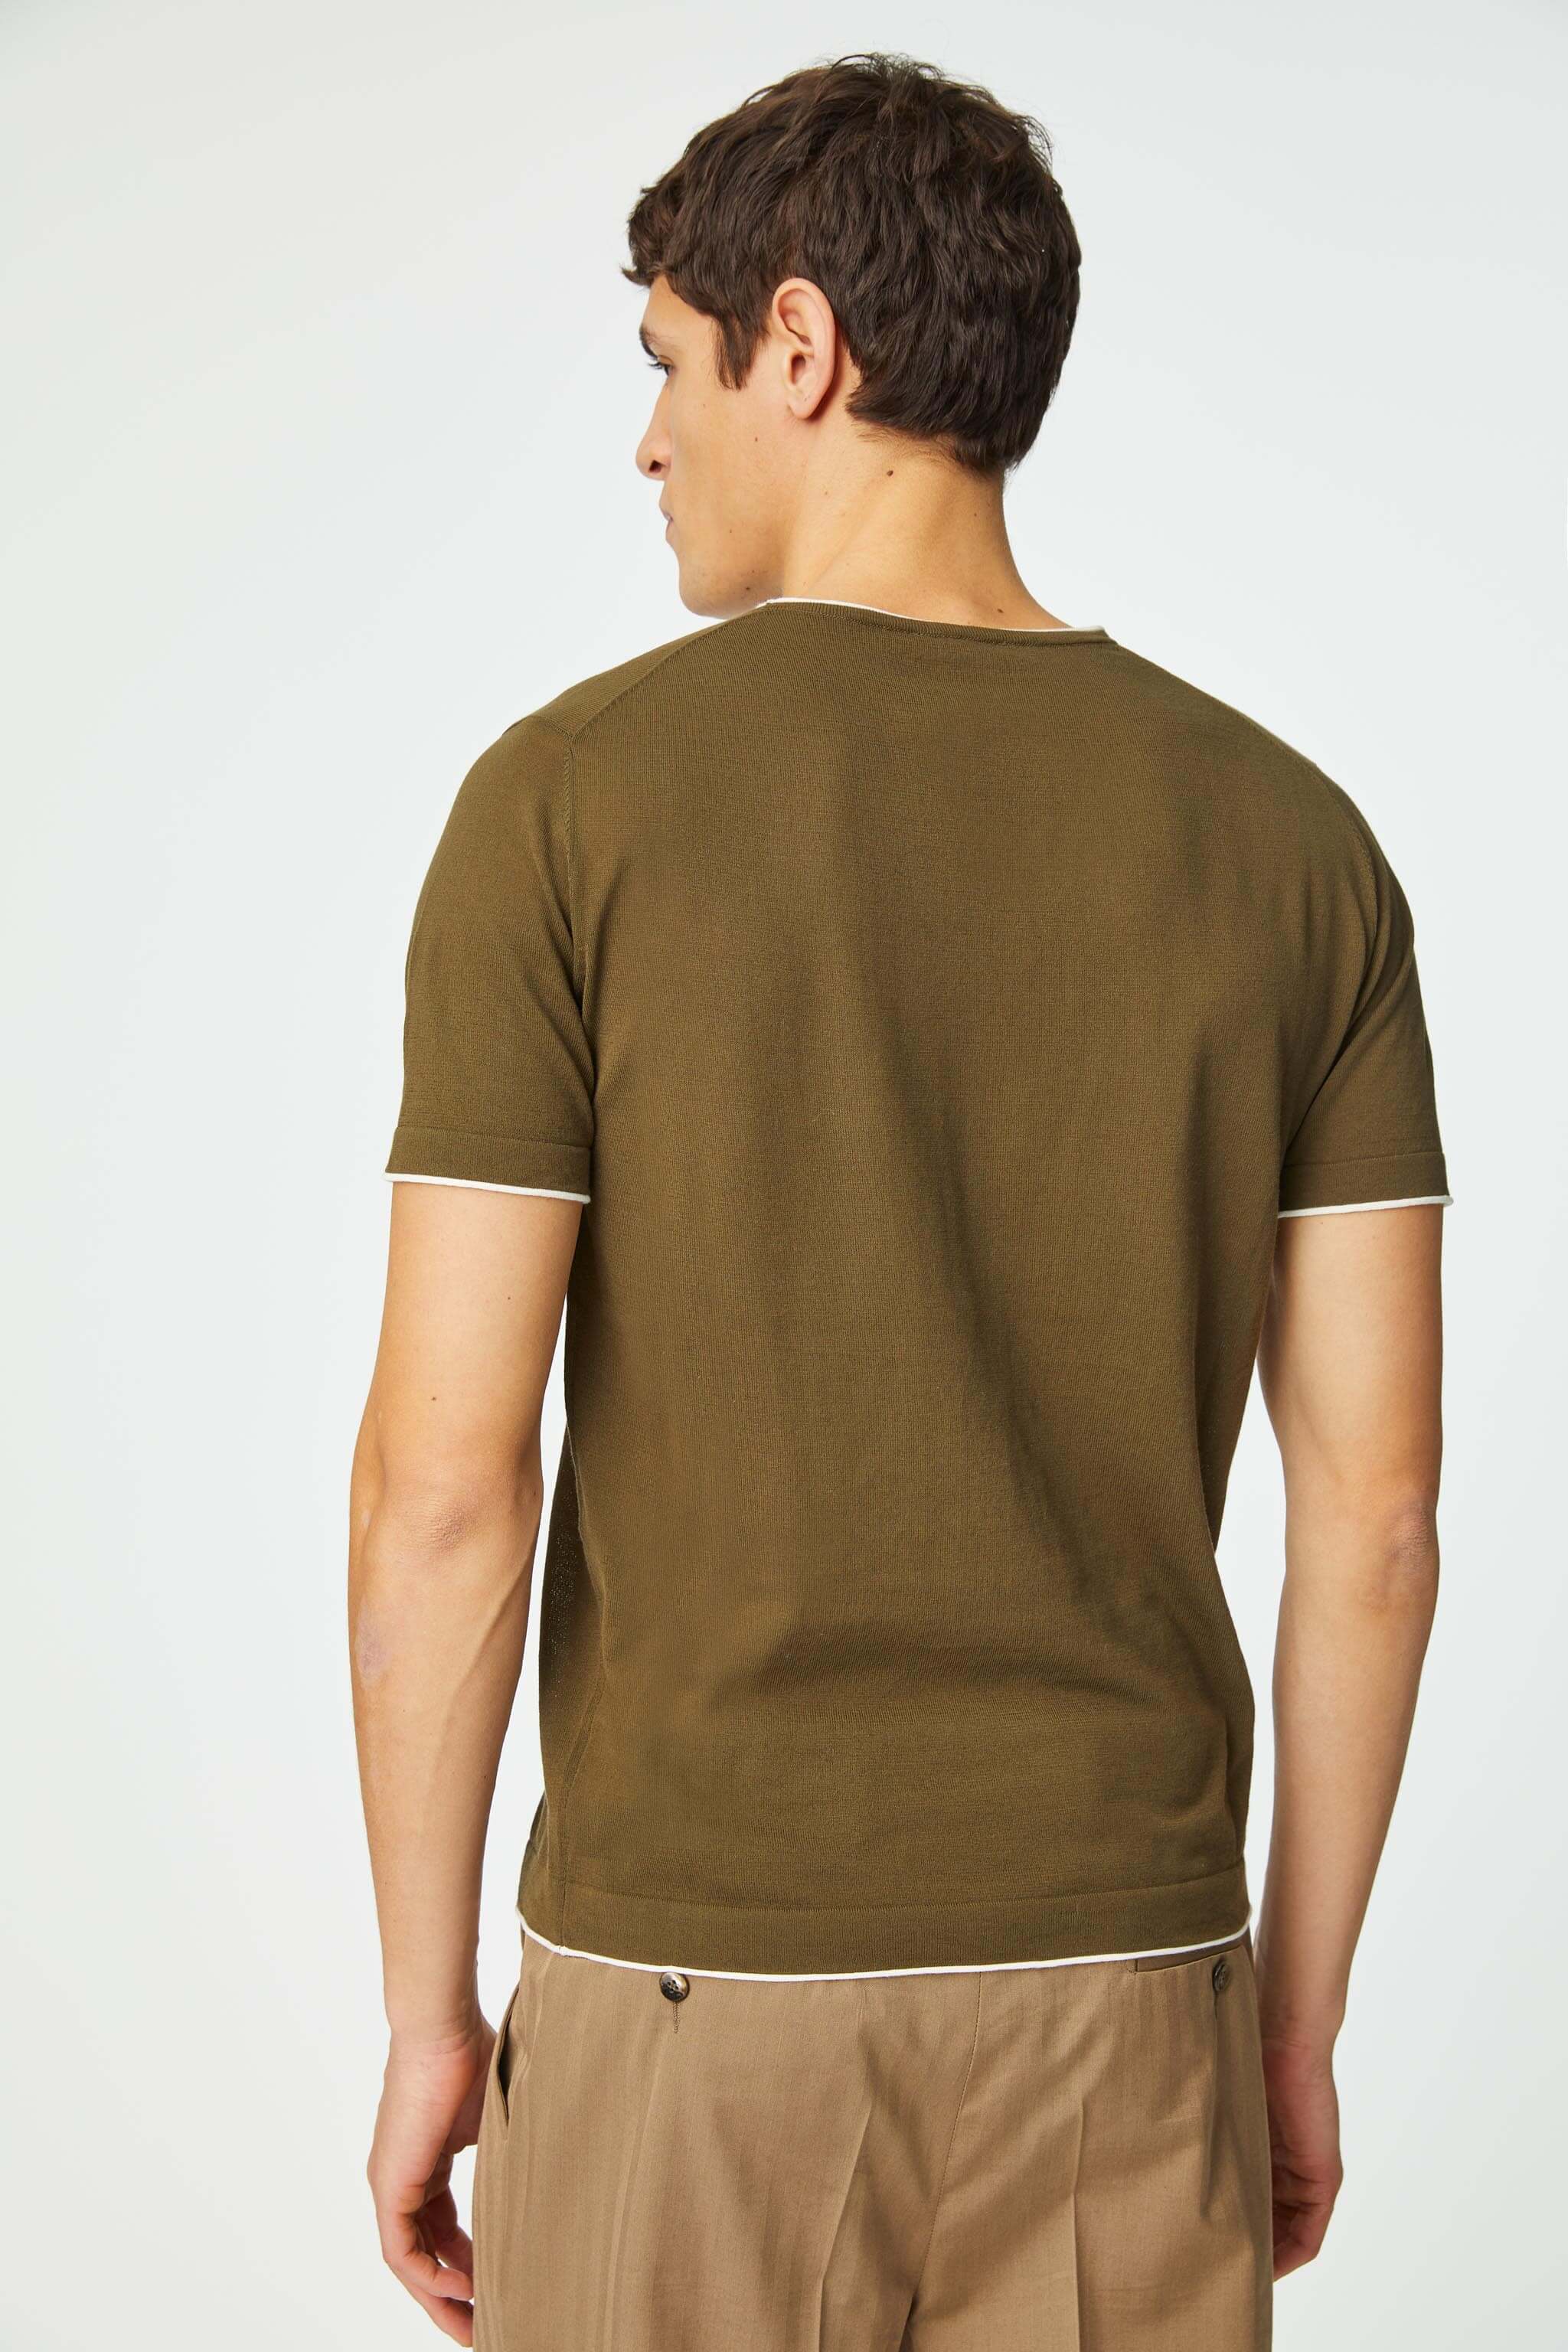 Contrast detail T-shirt in green